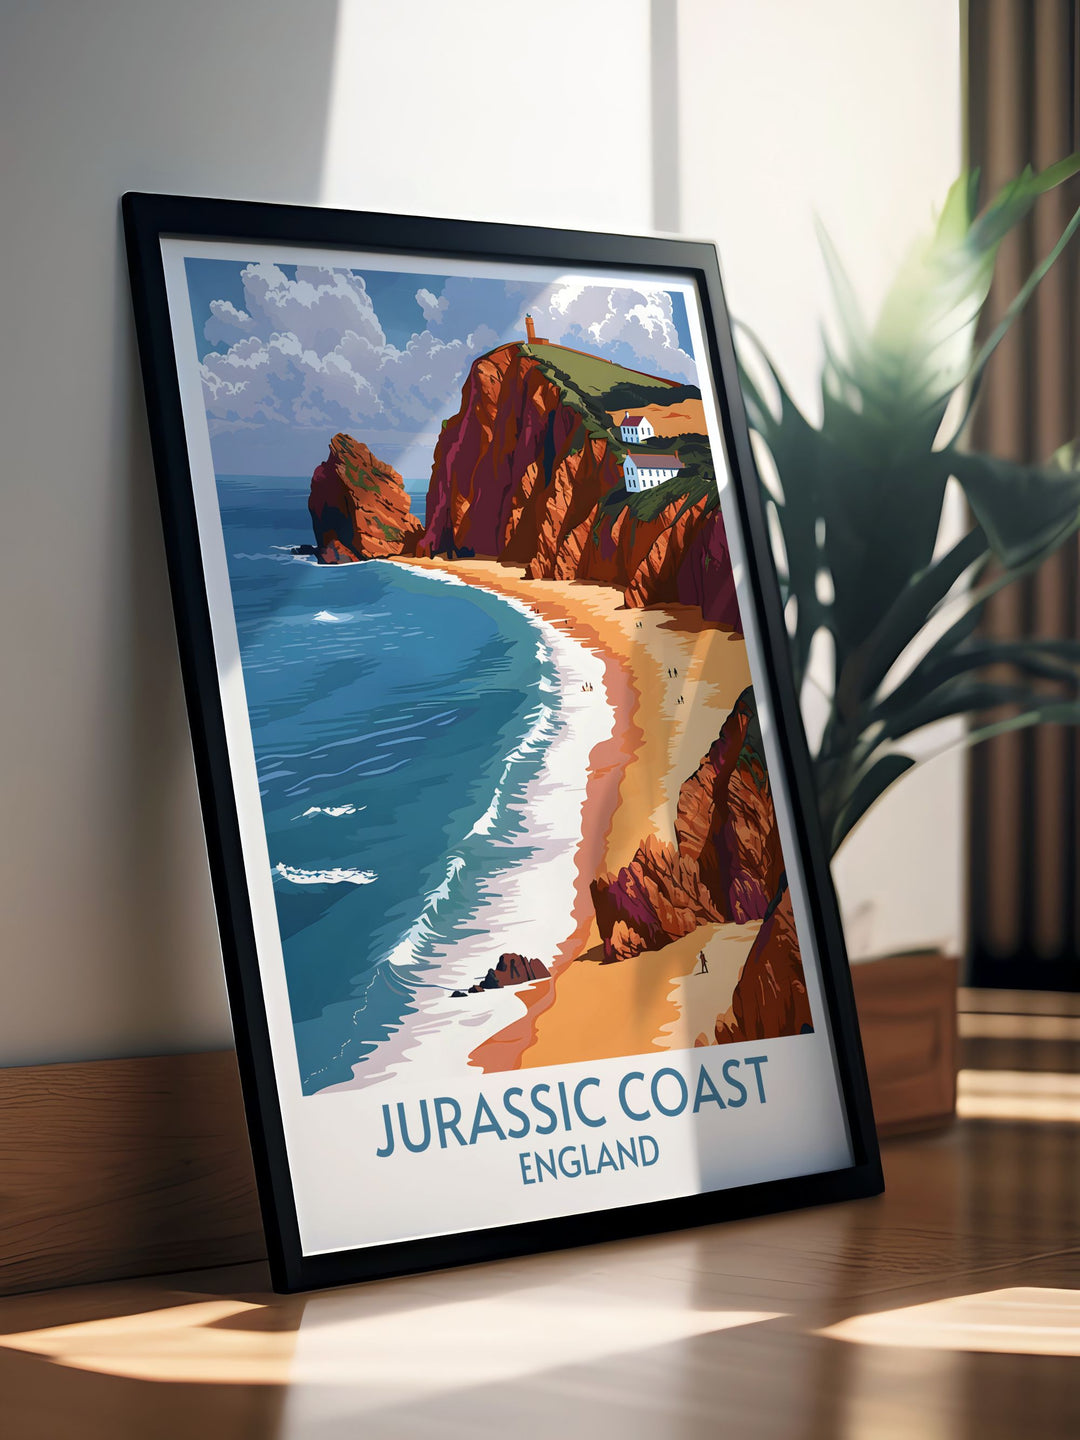 Personalized South West Coast custom print featuring your favorite scenes and landmarks, making thoughtful and unique gifts for friends and family.